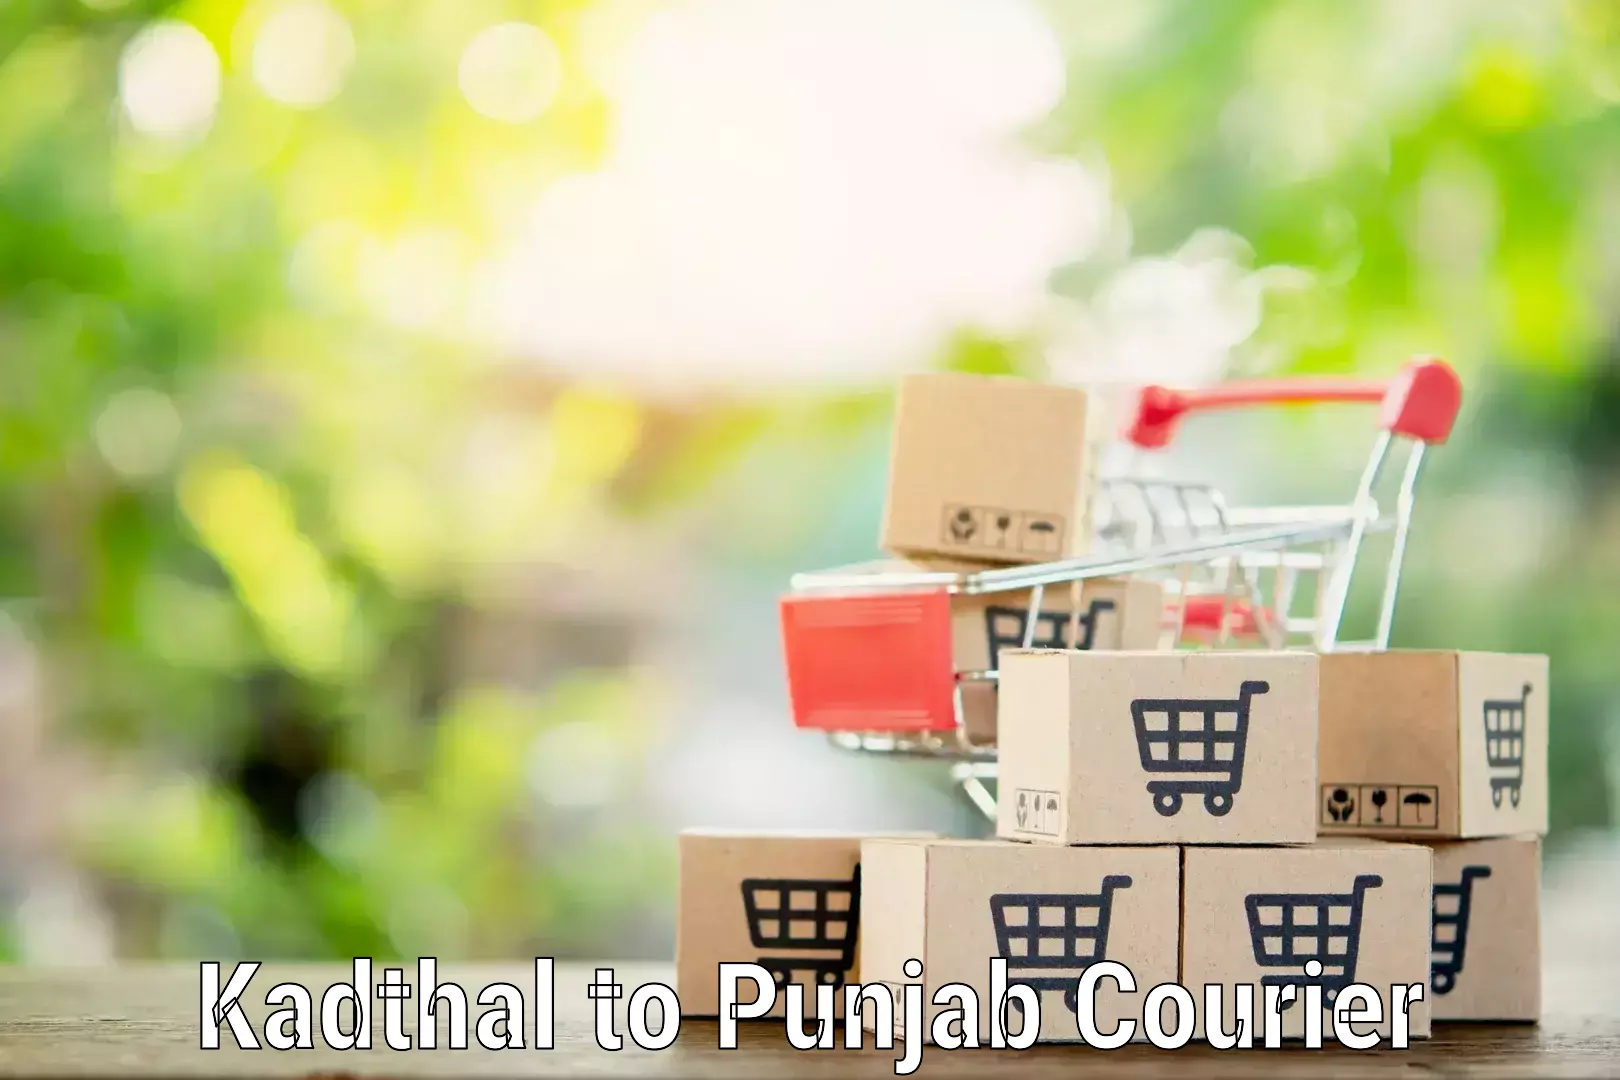 Furniture moving specialists Kadthal to Mohali